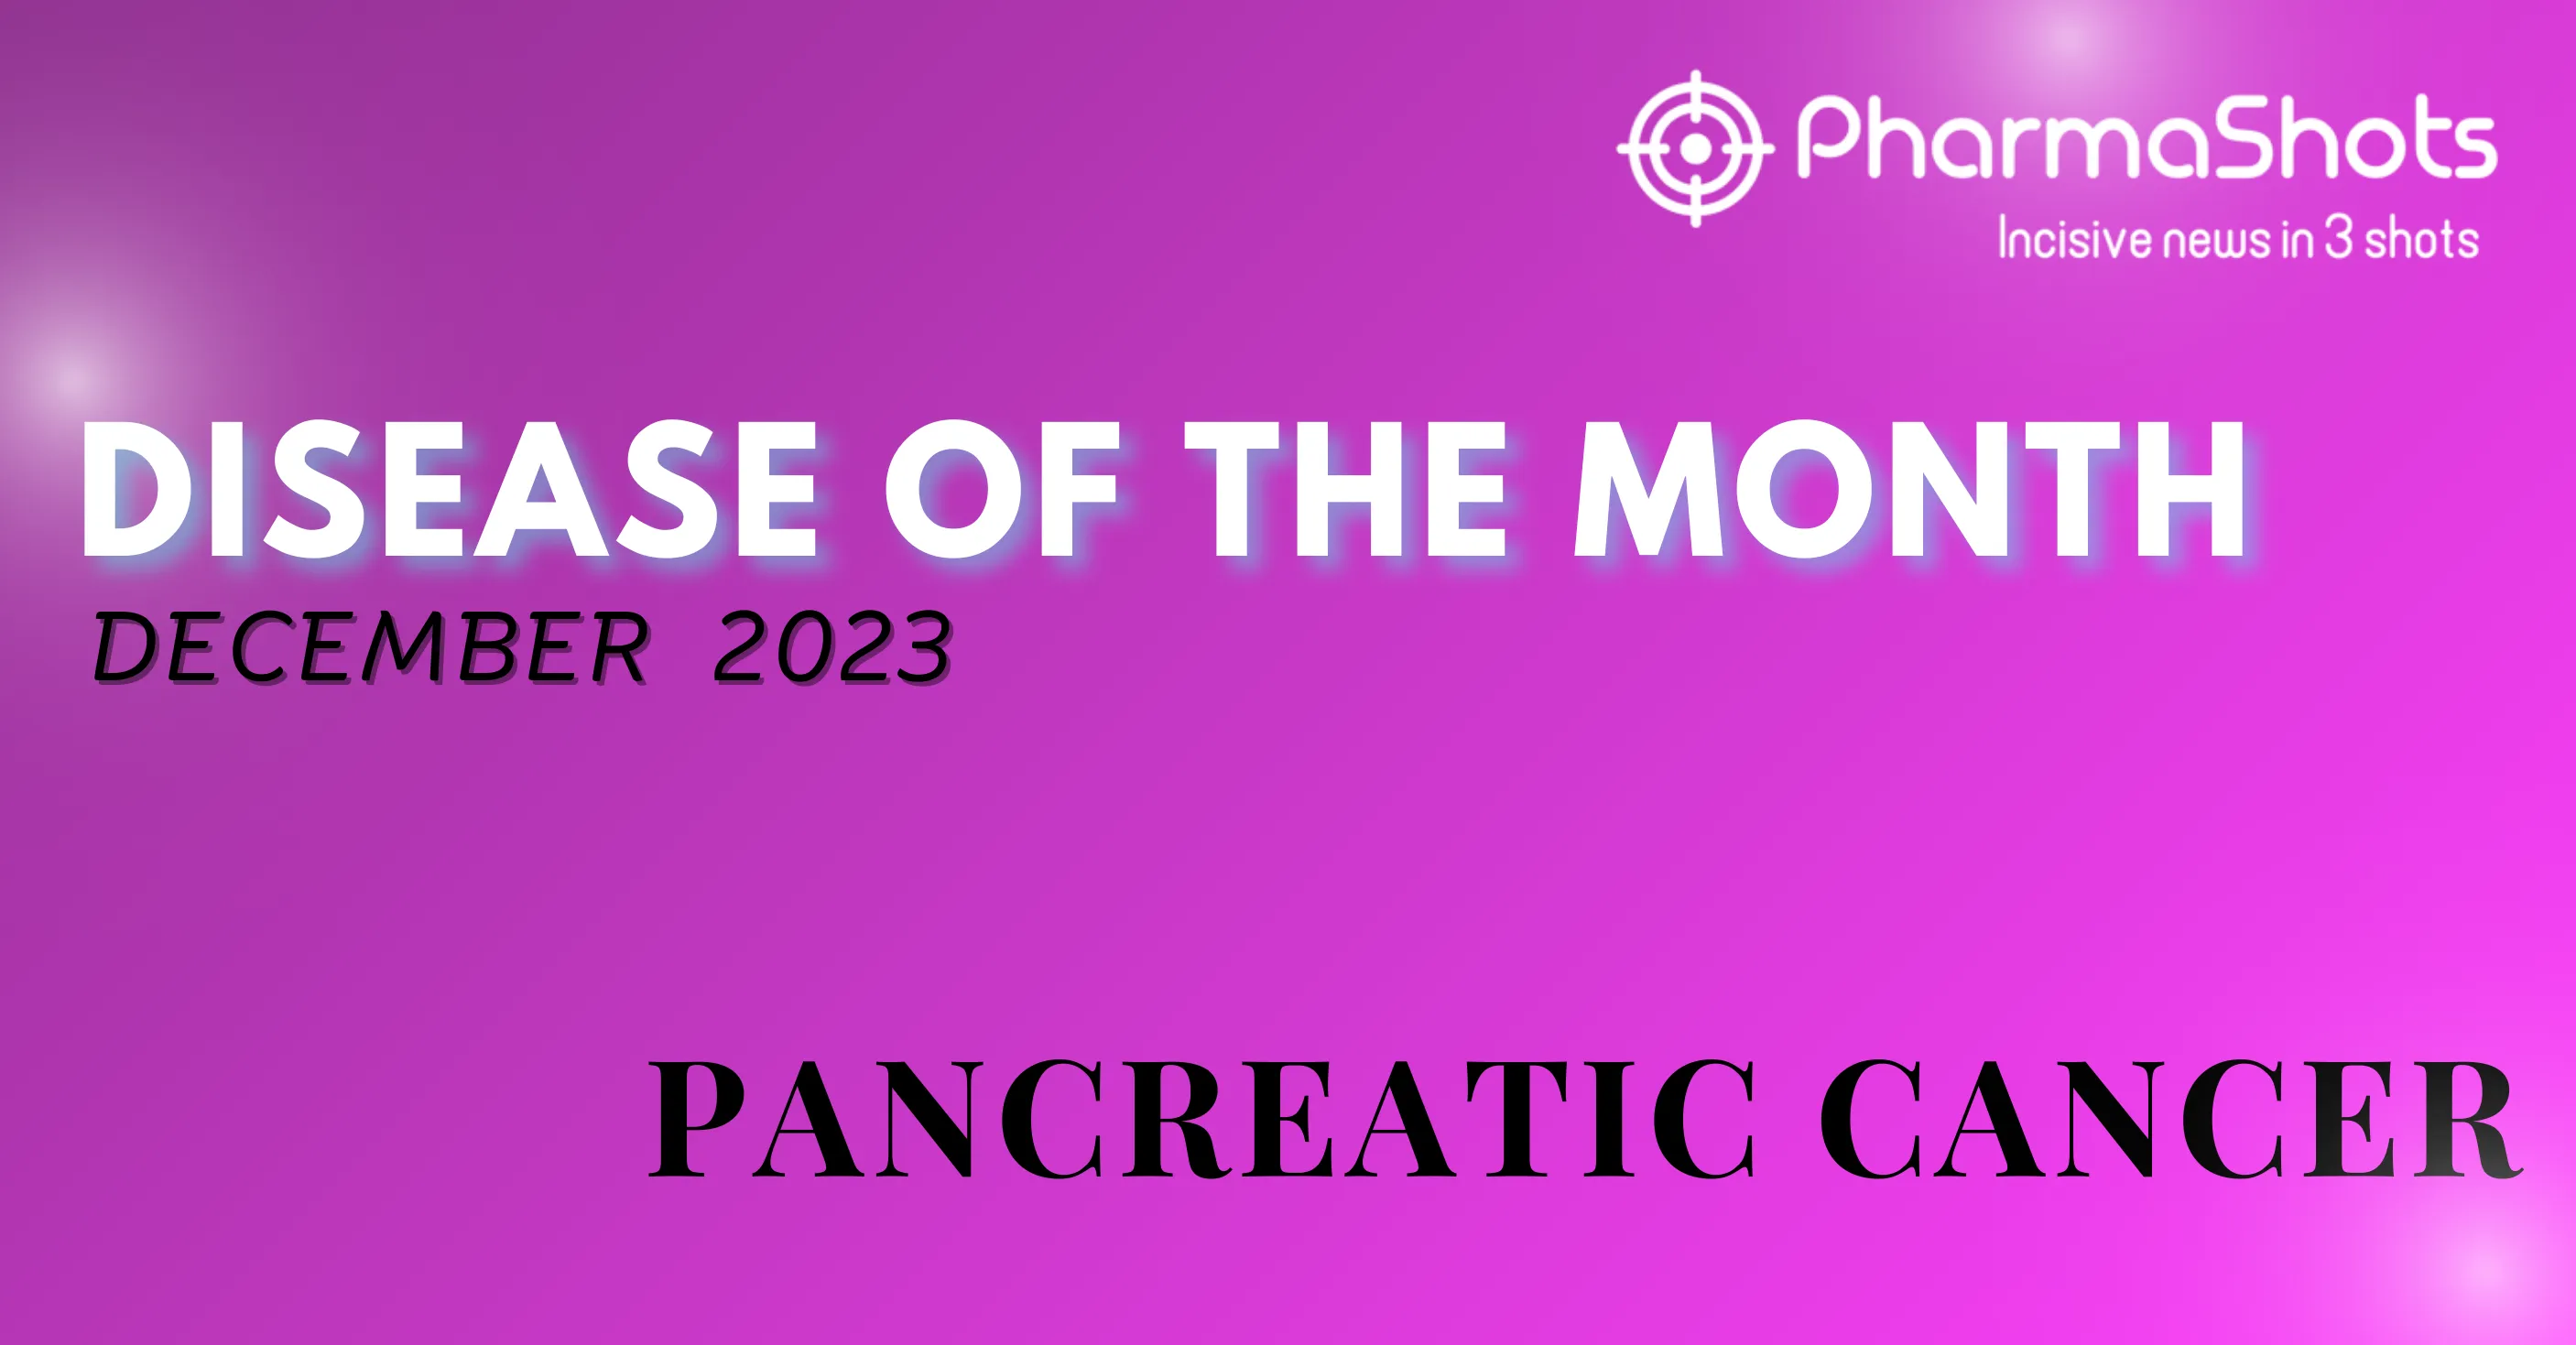 Disease of the Month - Pancreatic Cancer